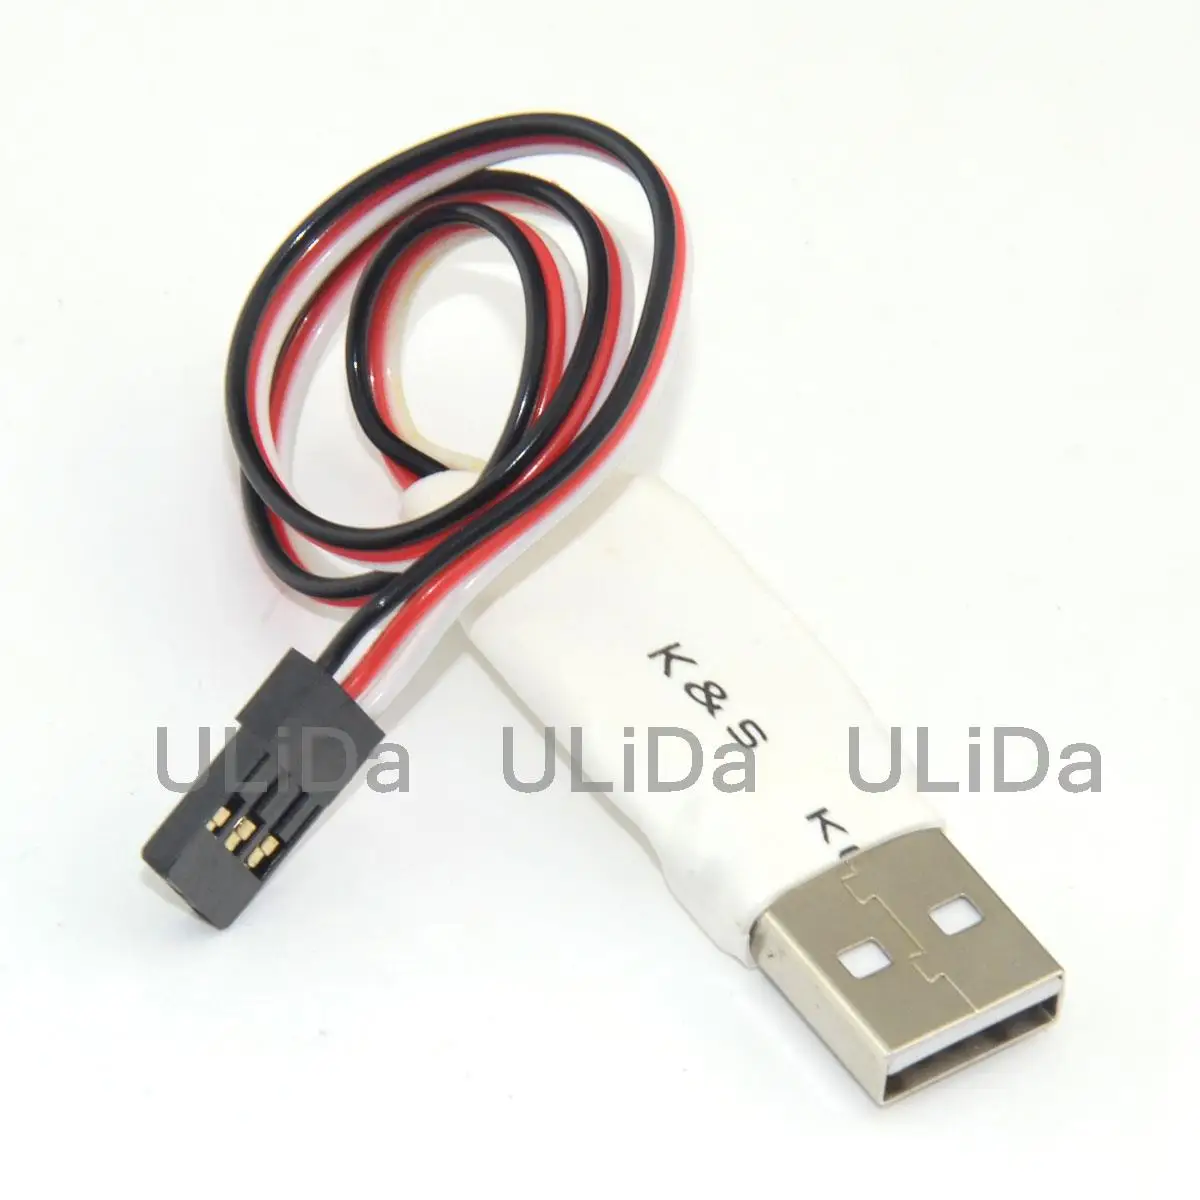 Details about   USB Cable BLE2SYS Interface For MICROBEAST PLUS StudioXm Debug Restore TGZ580 V5 